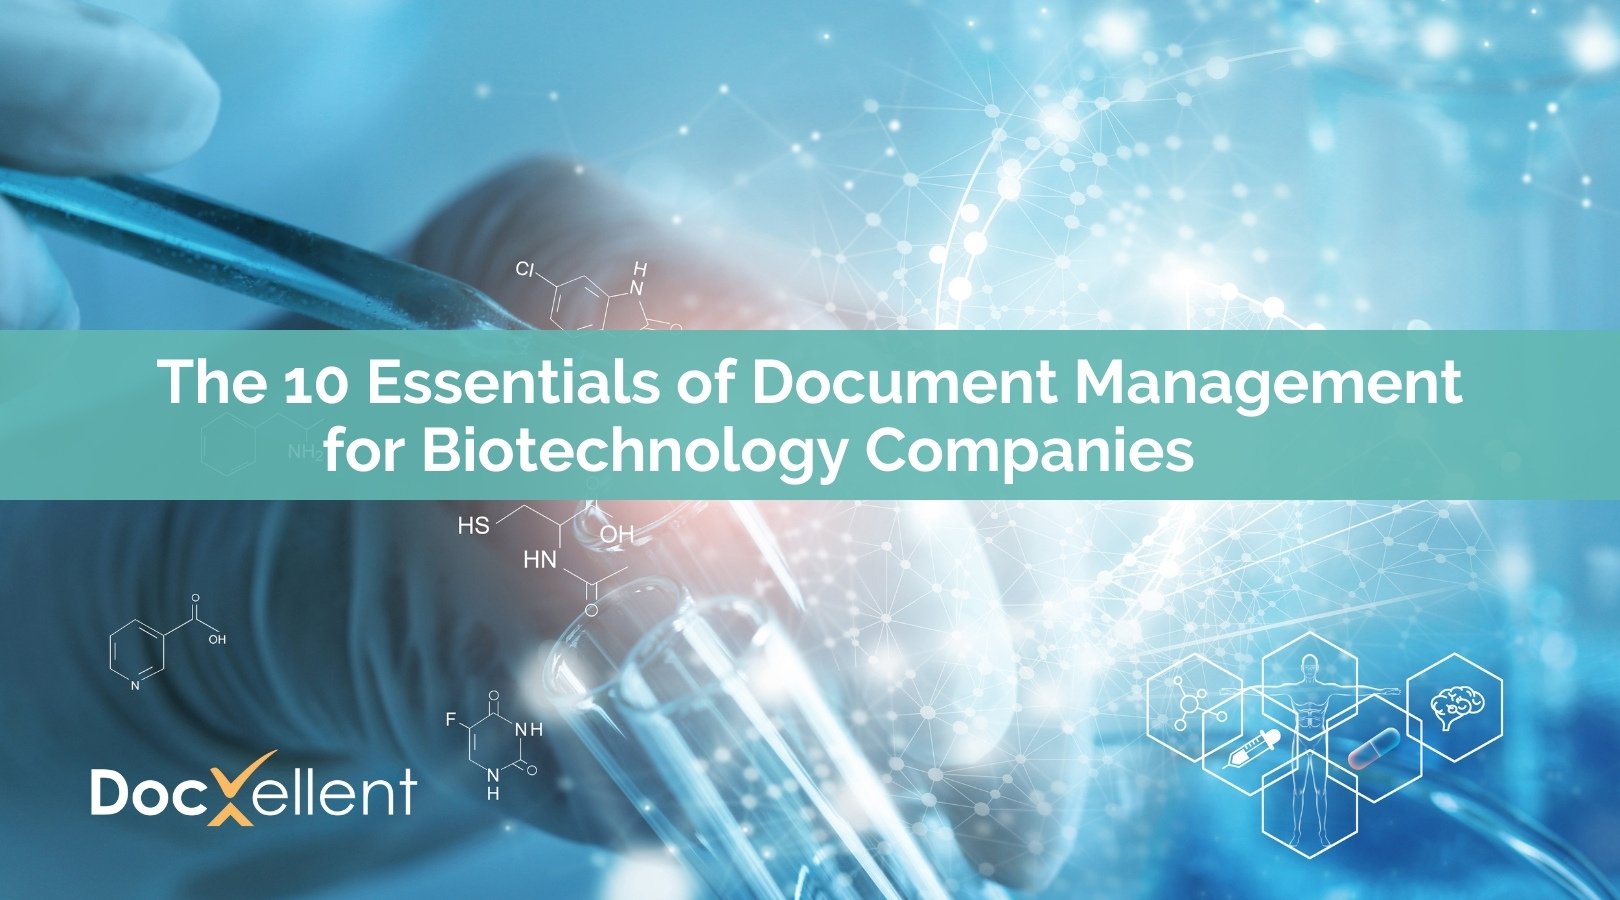 The 10 Essentials of Document Management for Biotechnology Companies